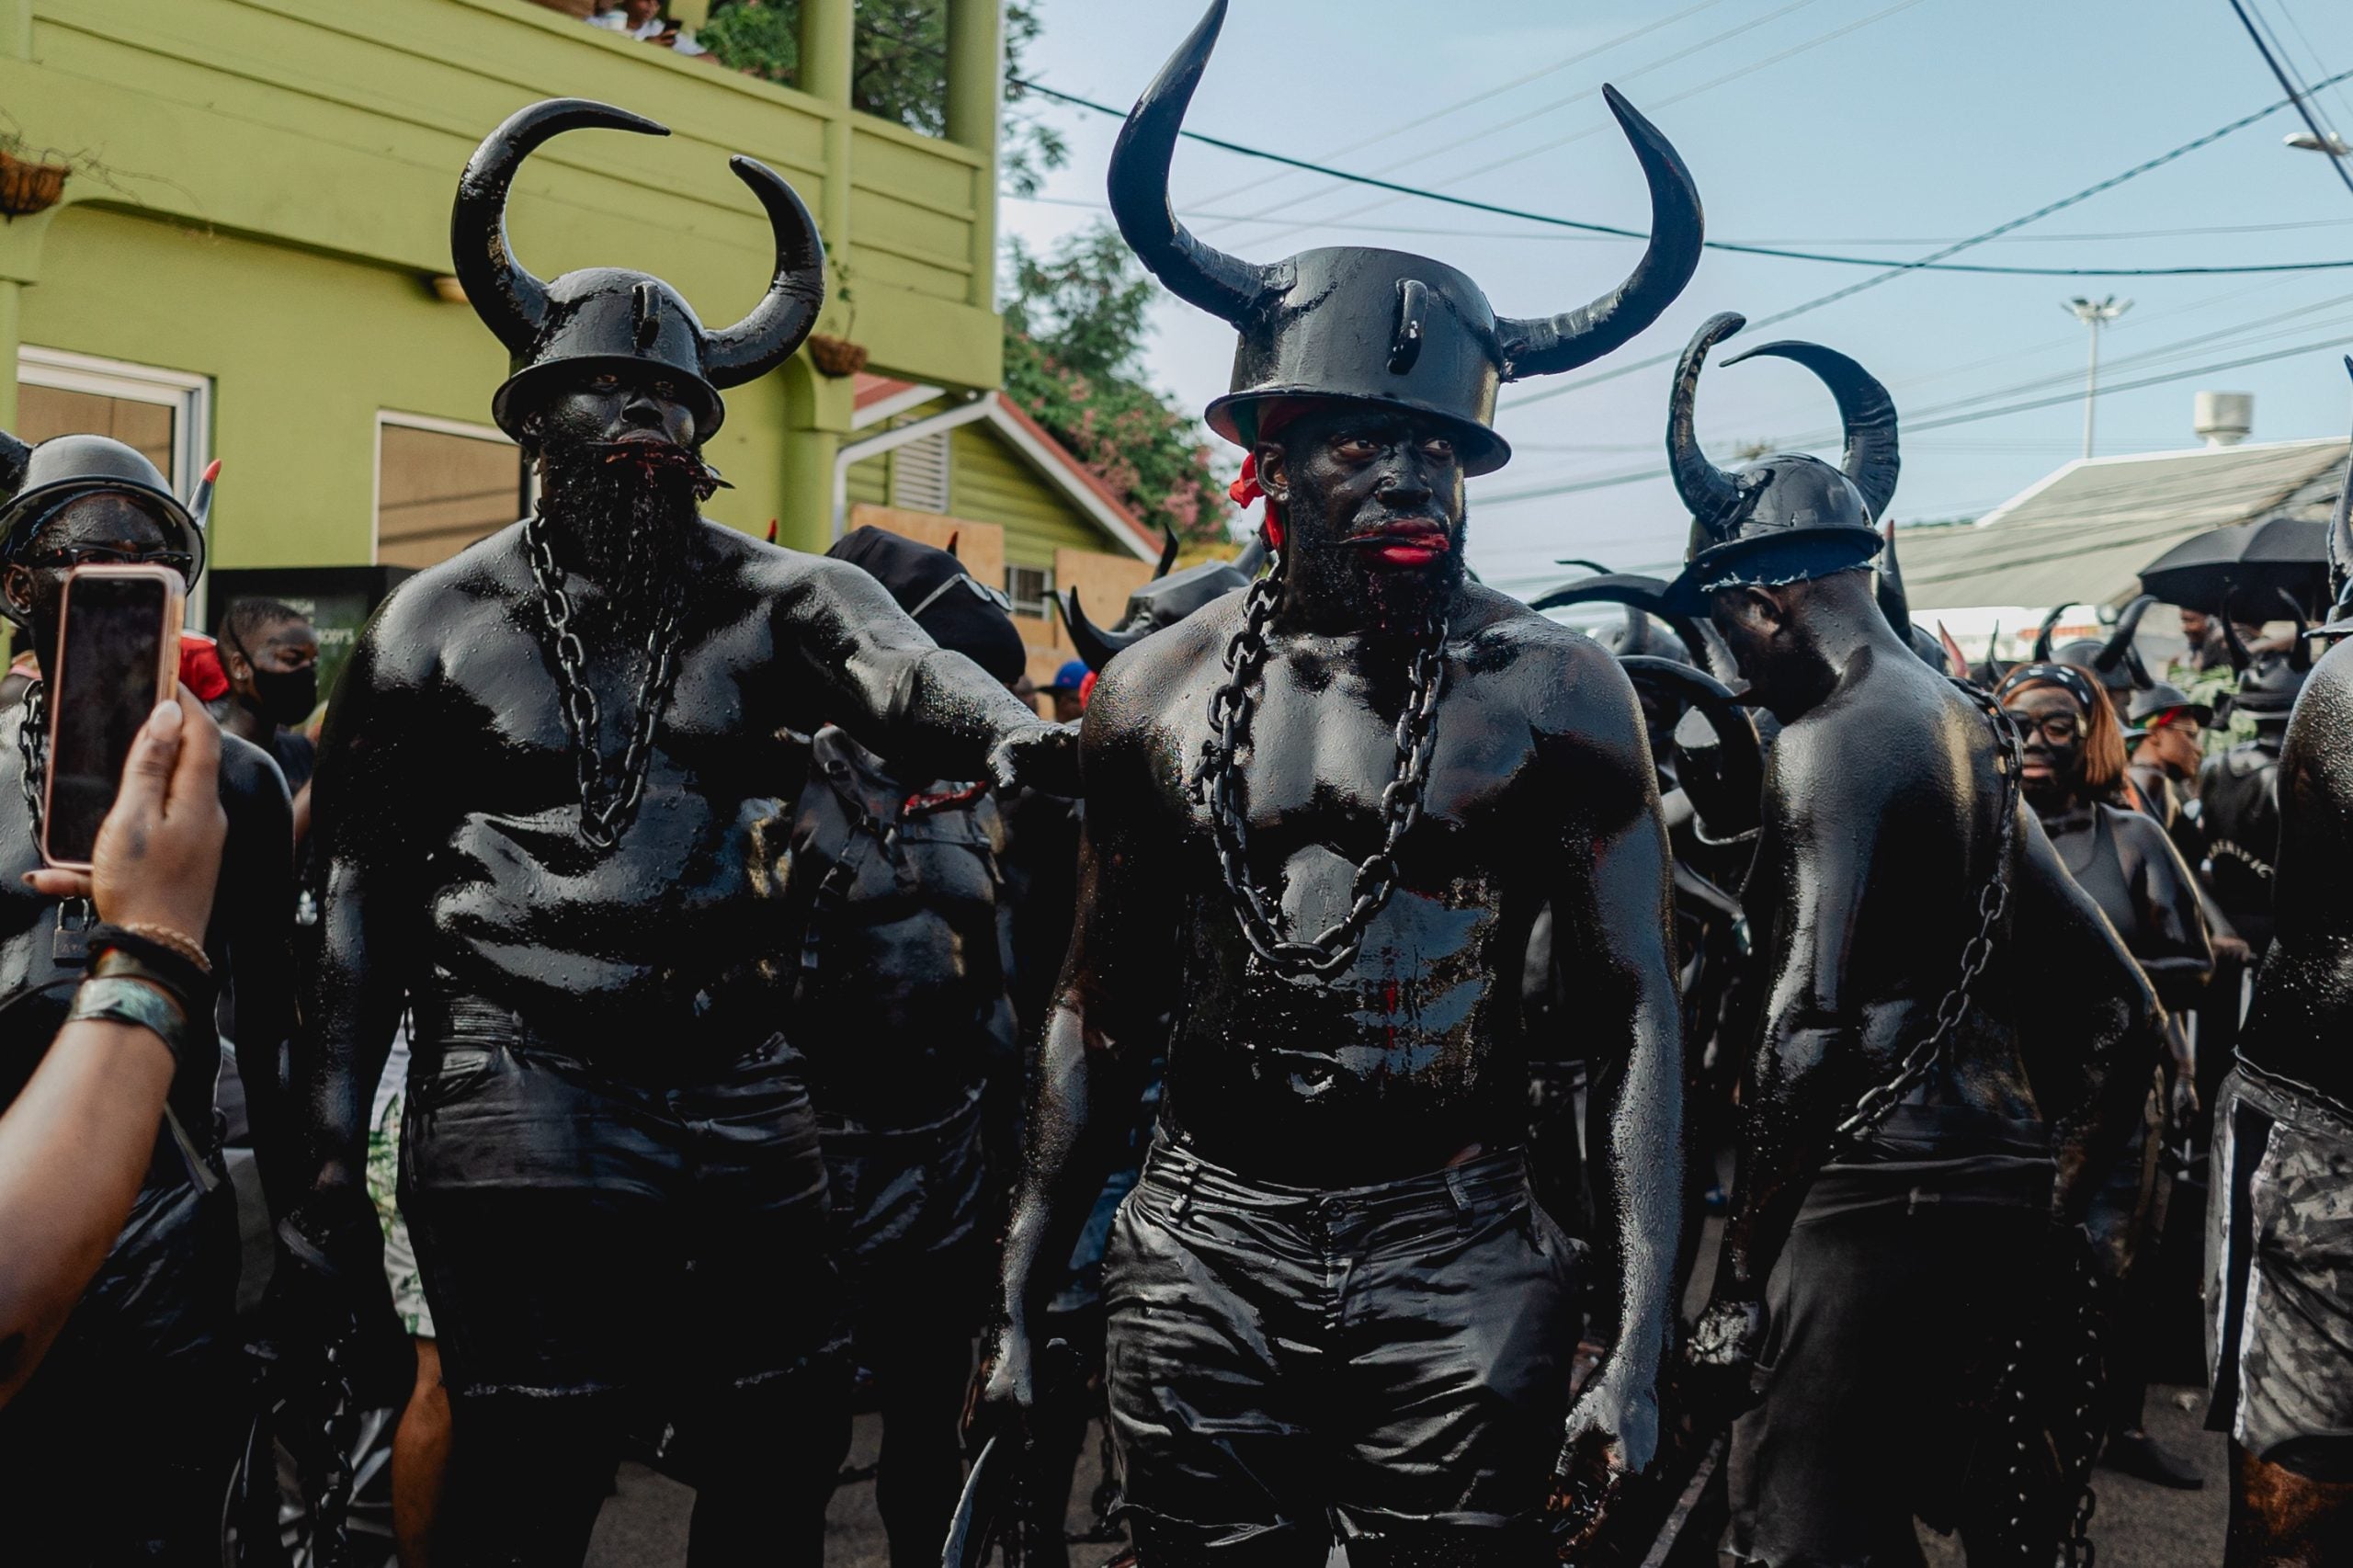 The Essence Of Mas: Traditional Carnival Characters That Tell The Stories Of Our Ancestors